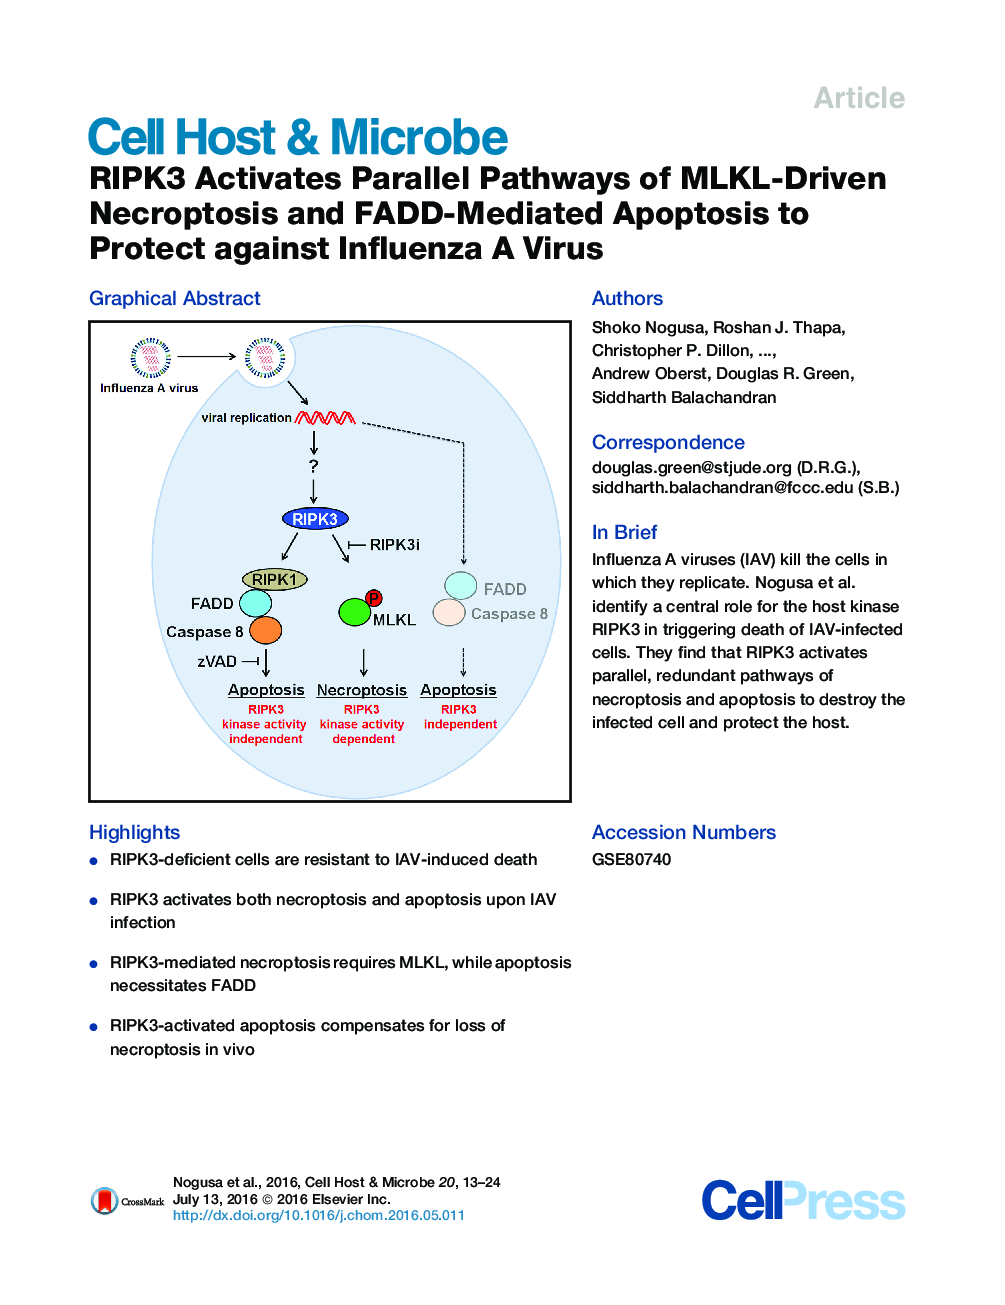 RIPK3 Activates Parallel Pathways of MLKL-Driven Necroptosis and FADD-Mediated Apoptosis to Protect against Influenza A Virus